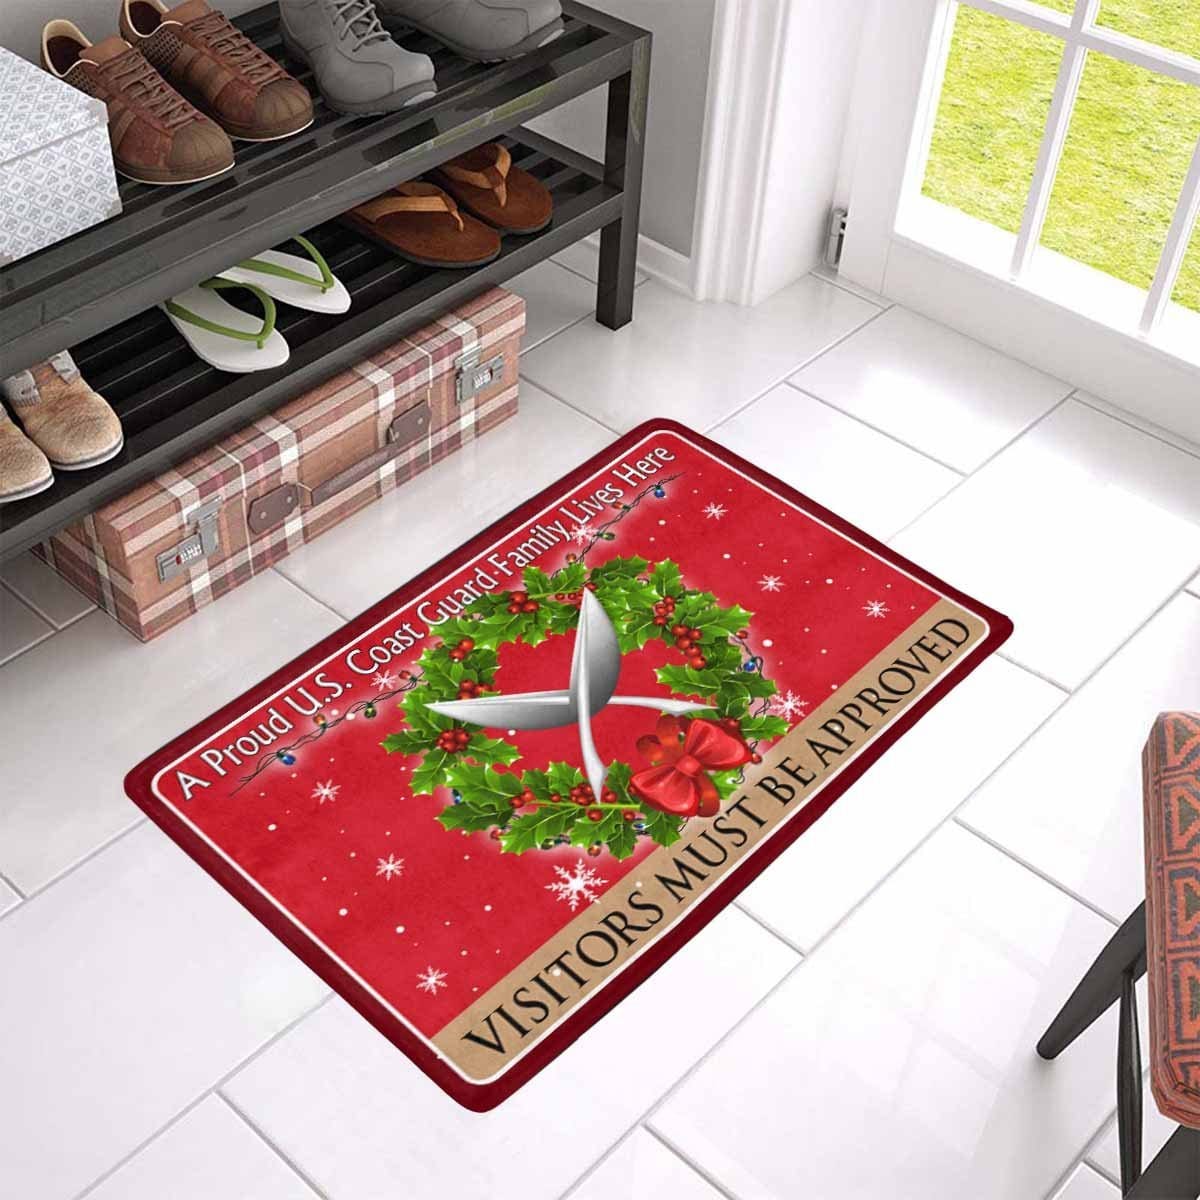 US Coast Guard Yeoman YN Logo - Visitors must be approved Christmas Doormat-Doormat-USCG-Rate-Veterans Nation